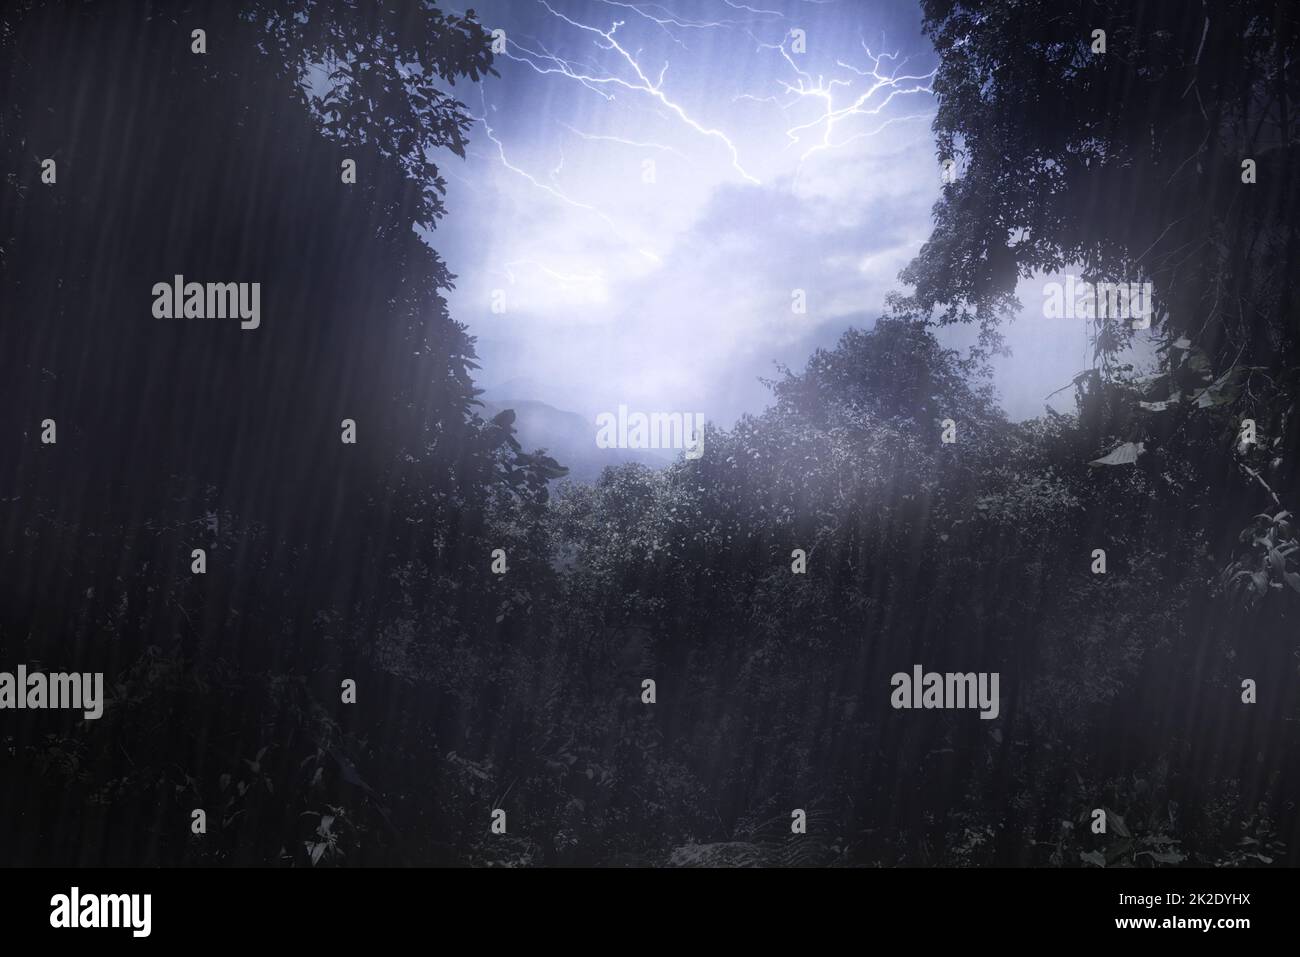 Mother natures mood. Cropped shot a thunderstorm over a mountain as seen through a clearing in the forest. Stock Photo